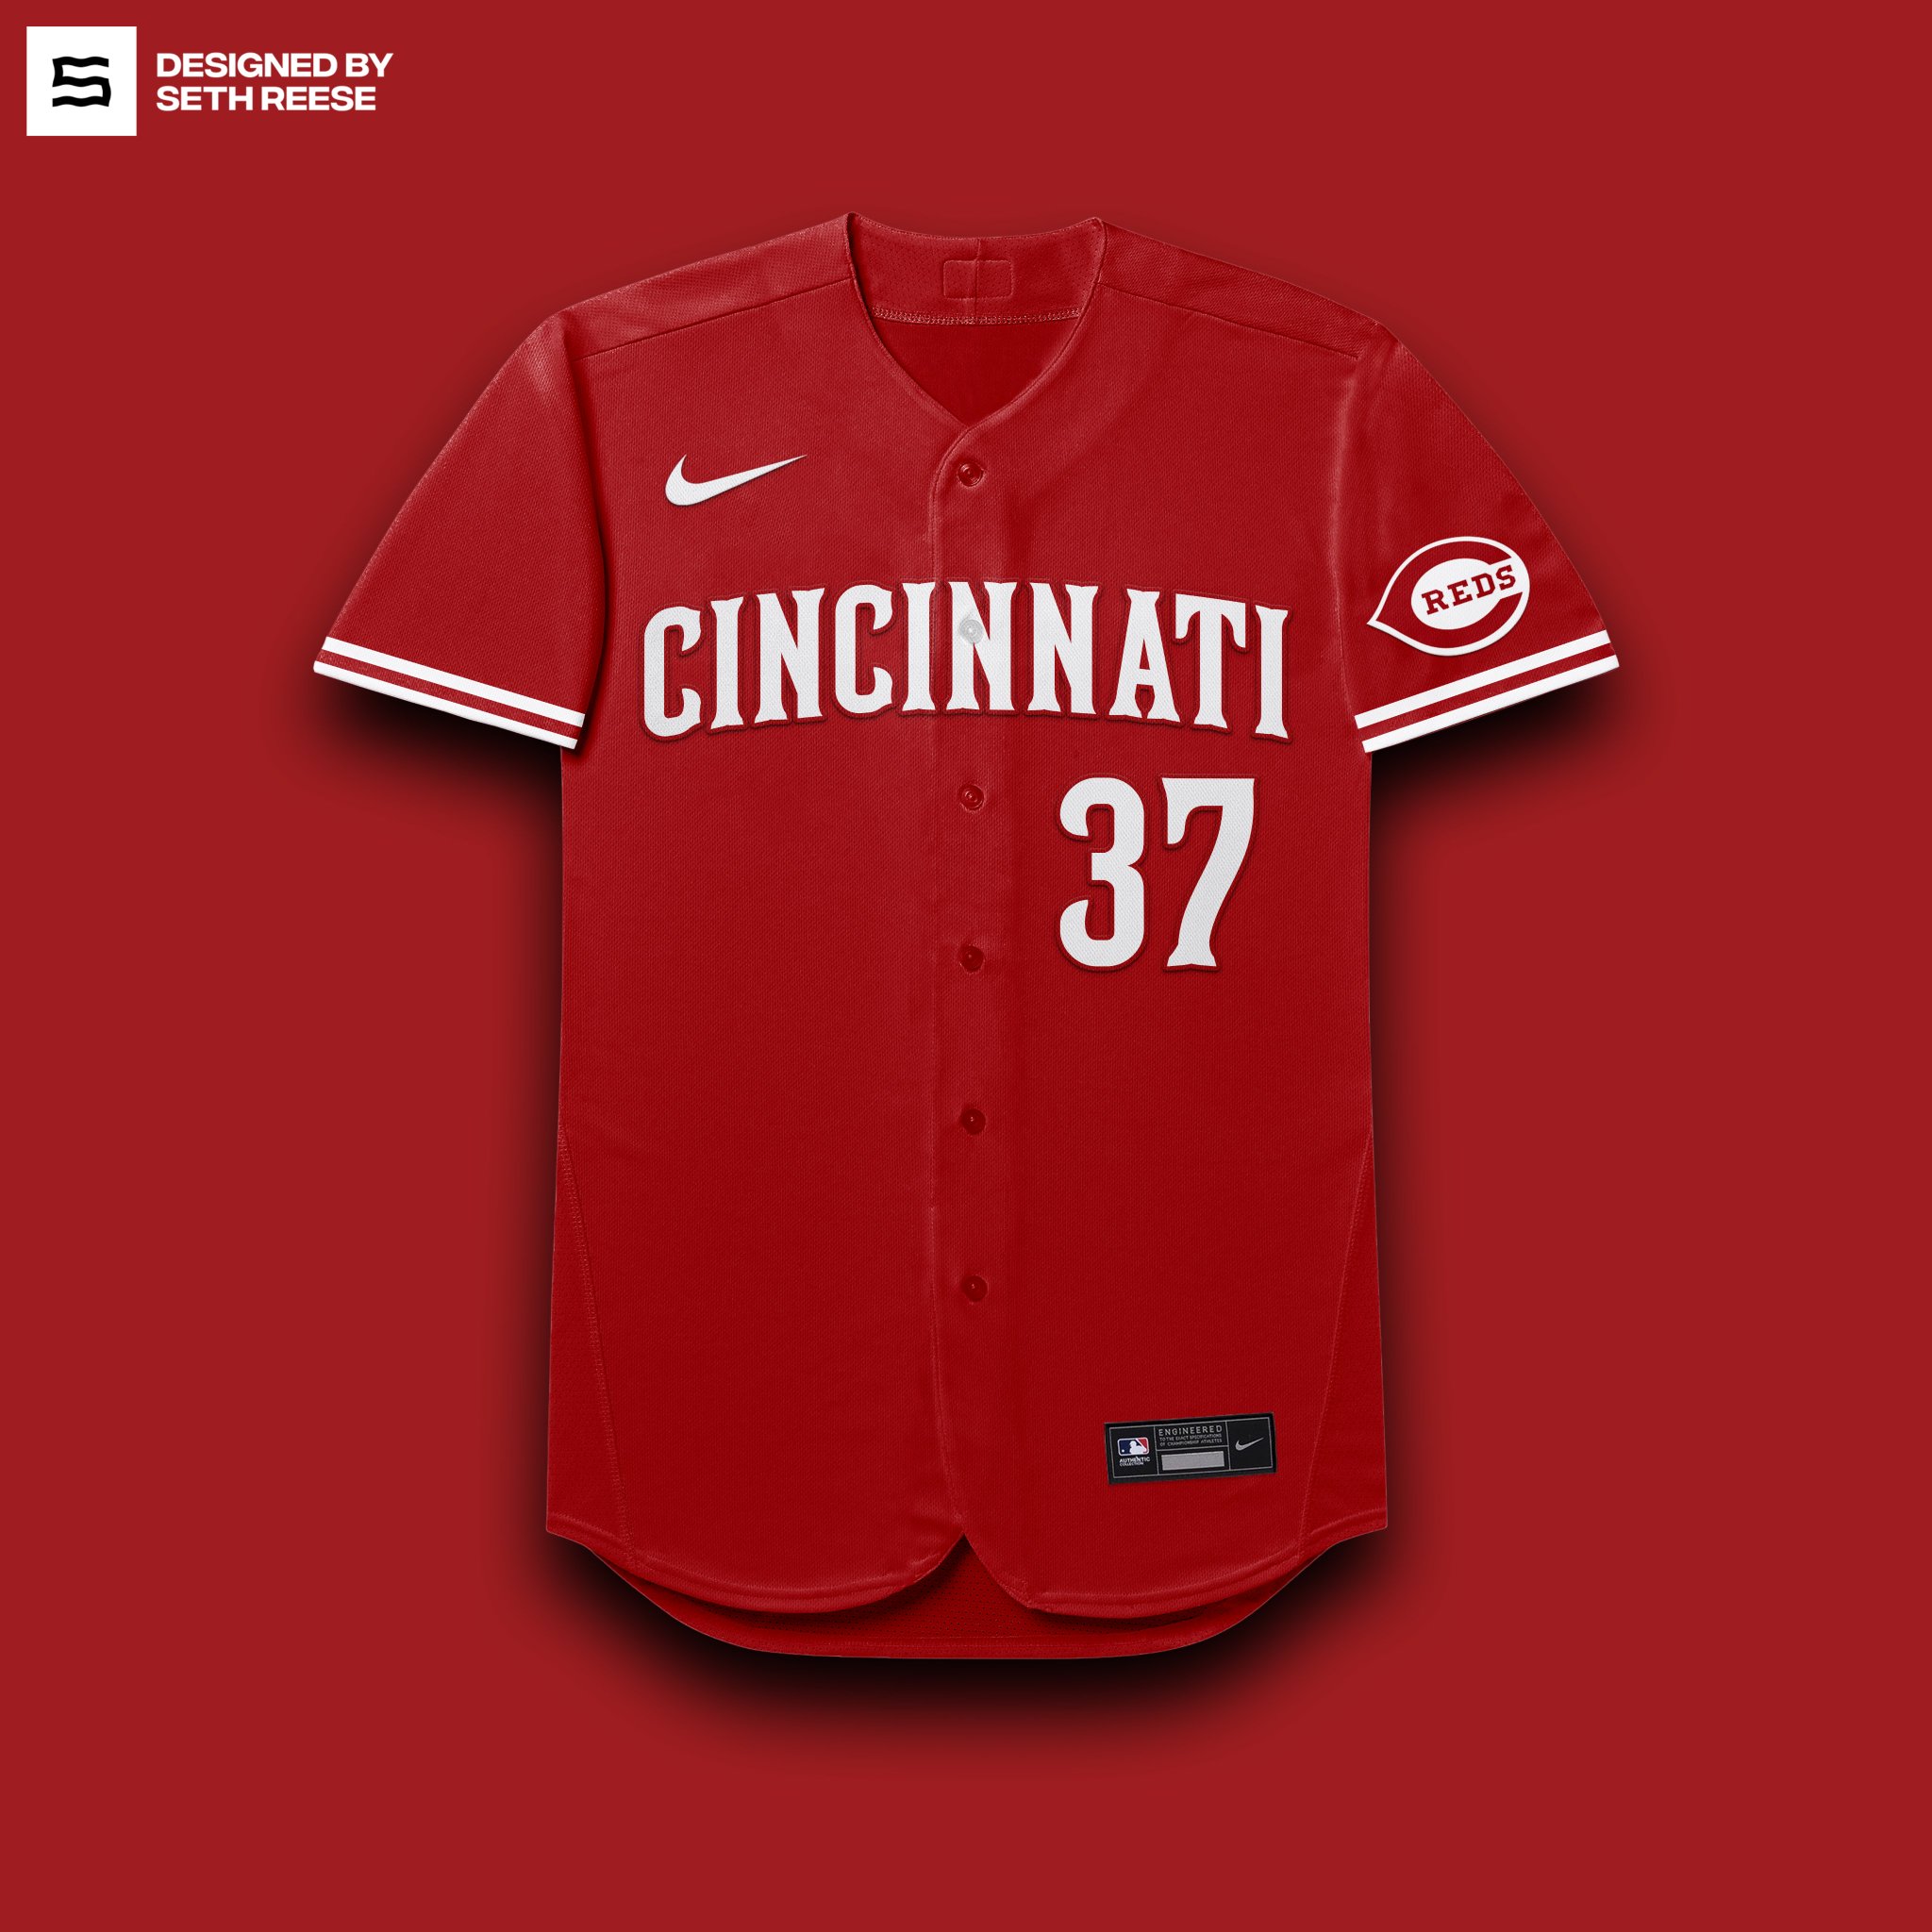 seth reese † on X: some more cincinnati reds ( @Reds ) jersey